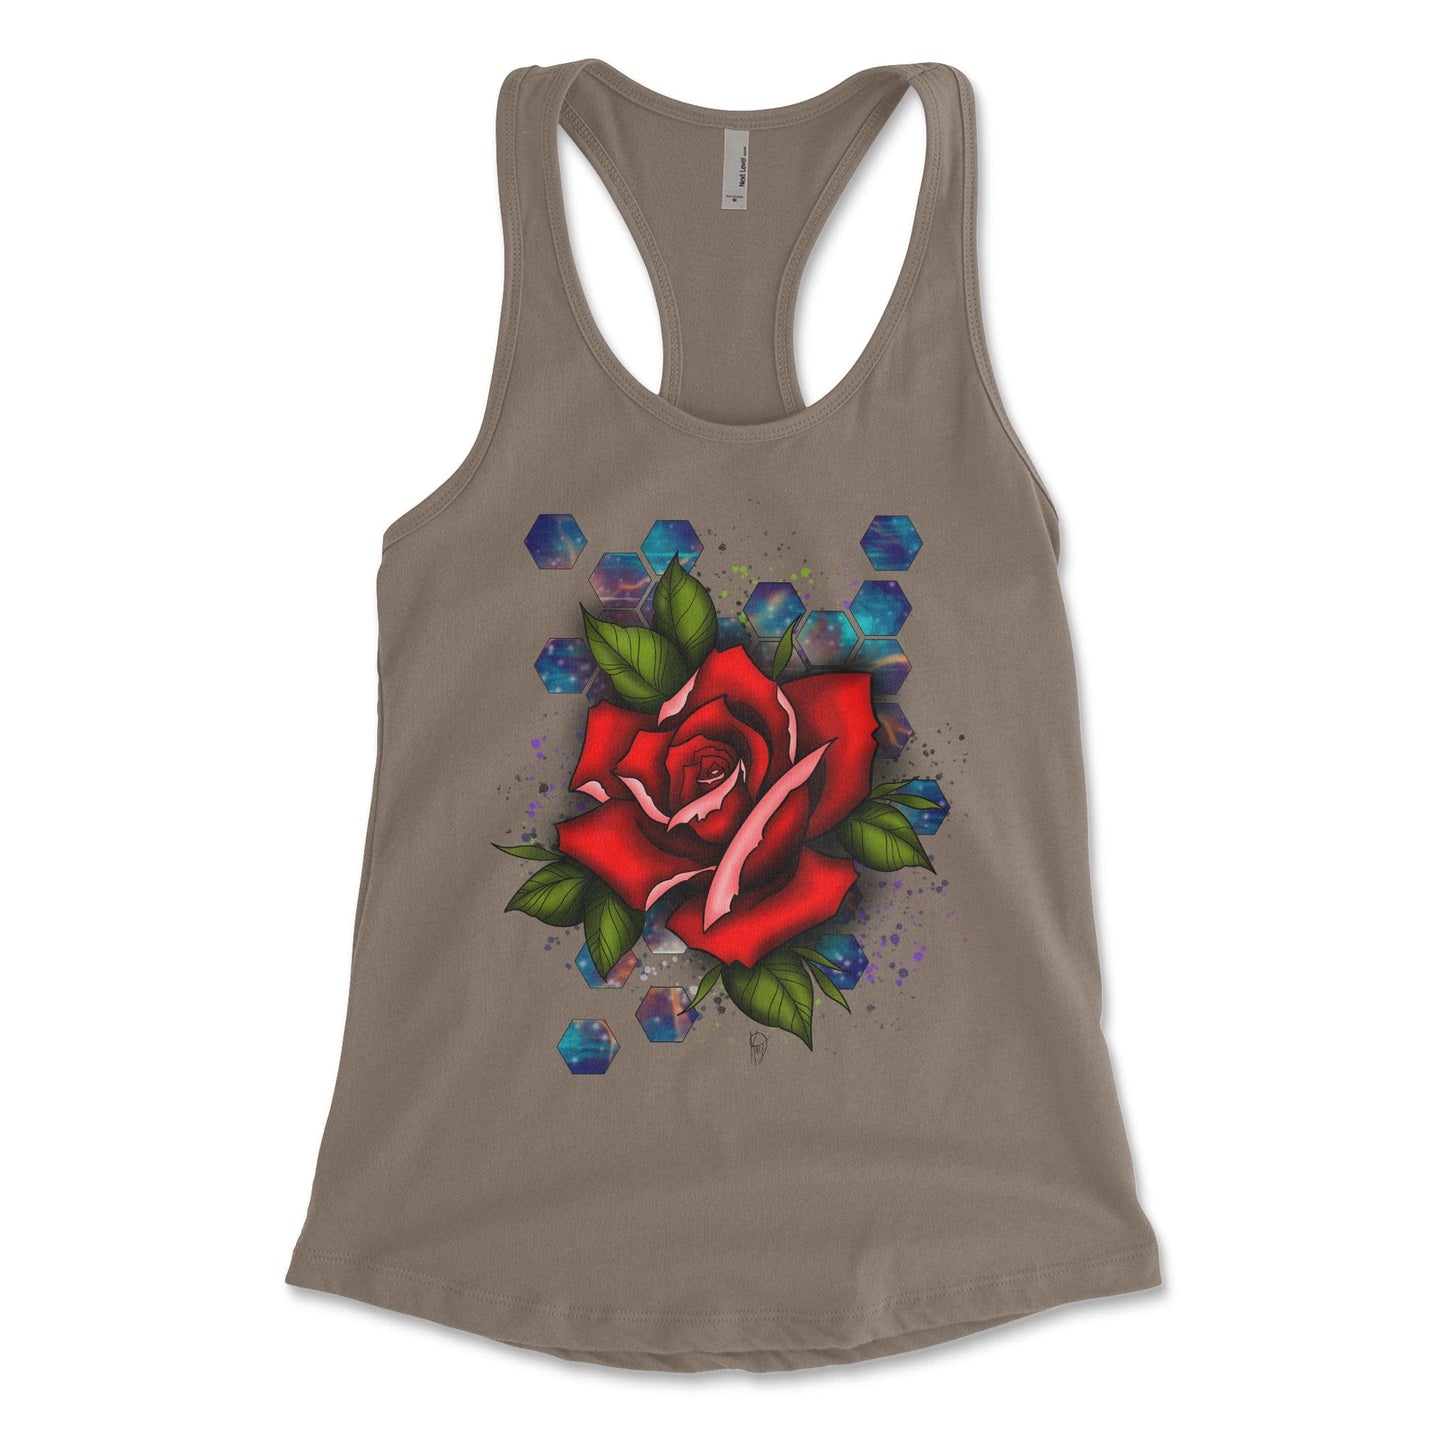 Legendary ltd. T SHIRT Rose and Stained Glass Tank by Kaylee